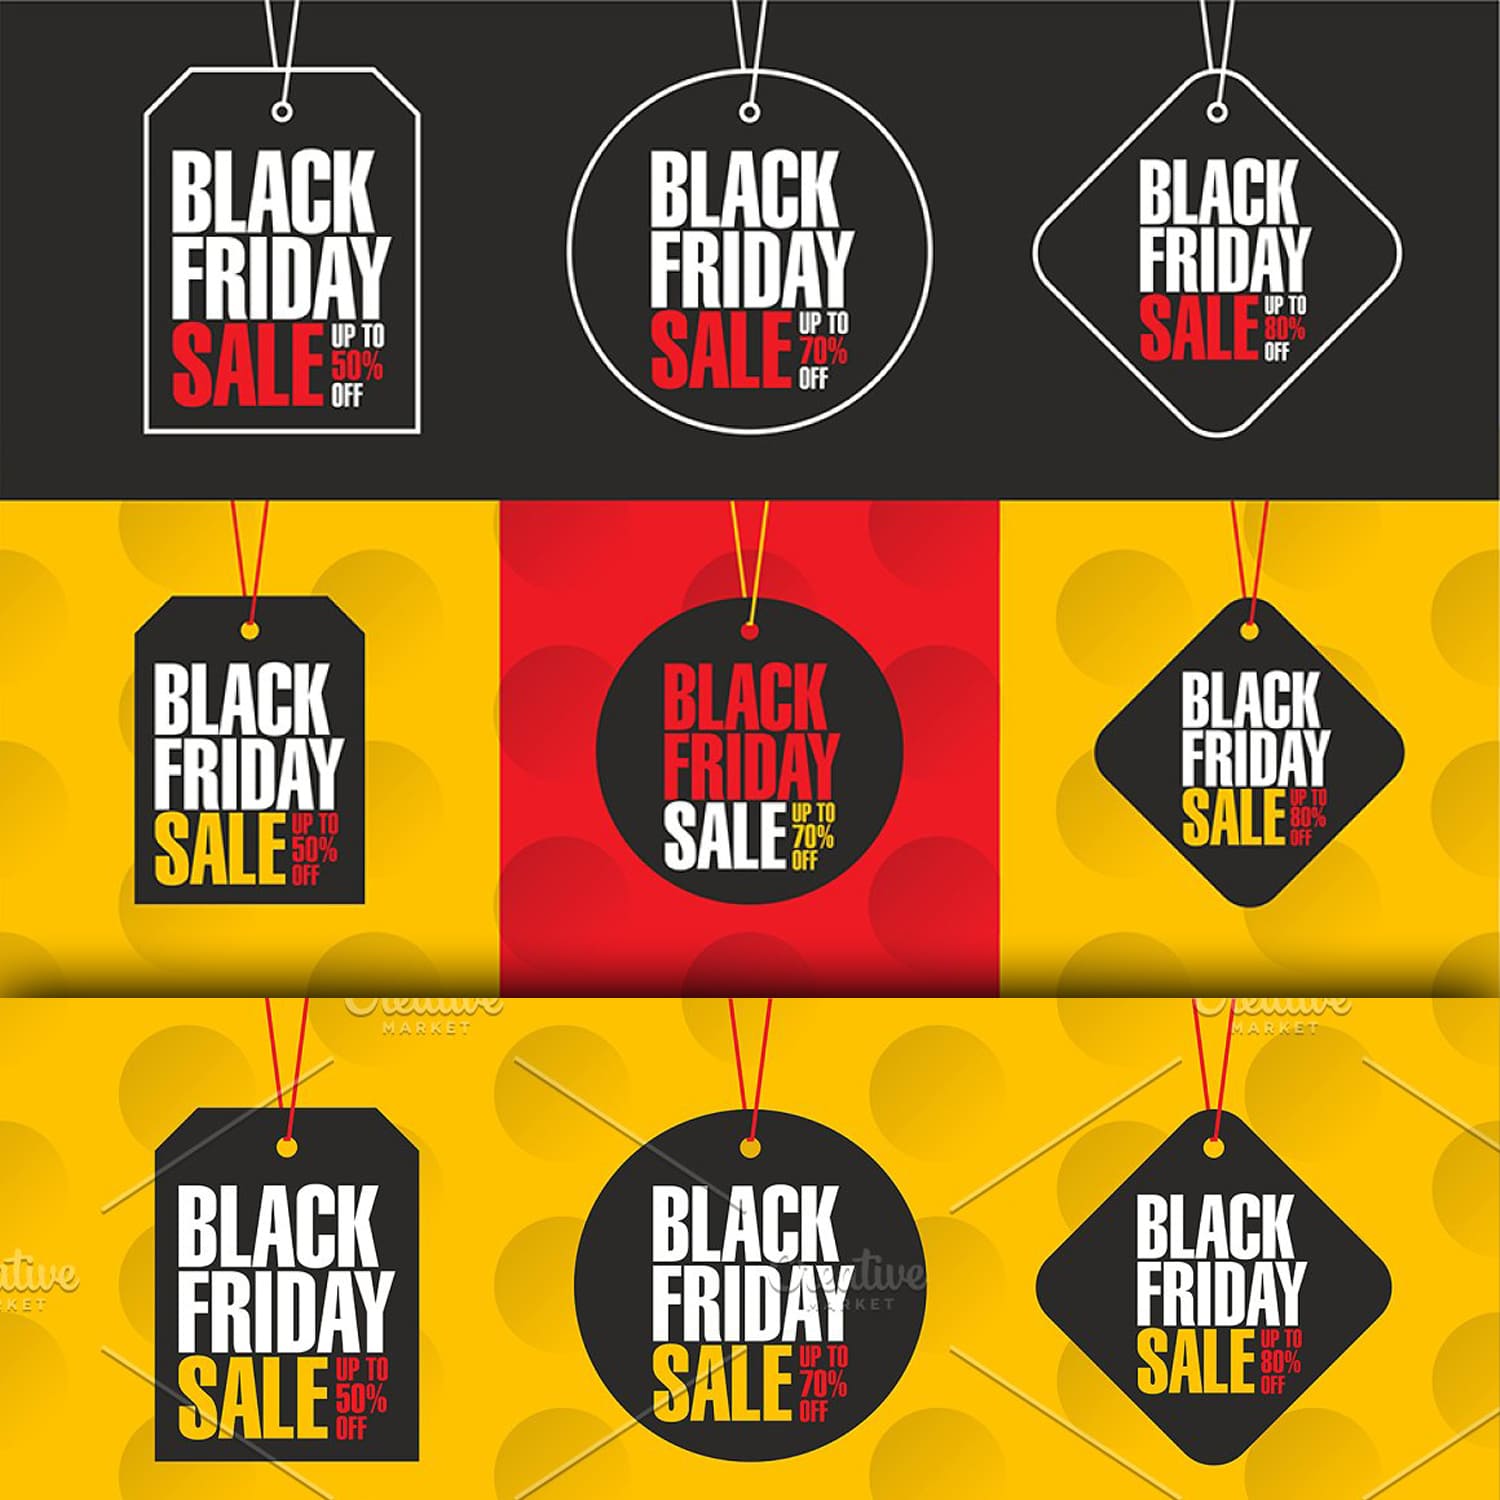 Black Friday Banners Cover.